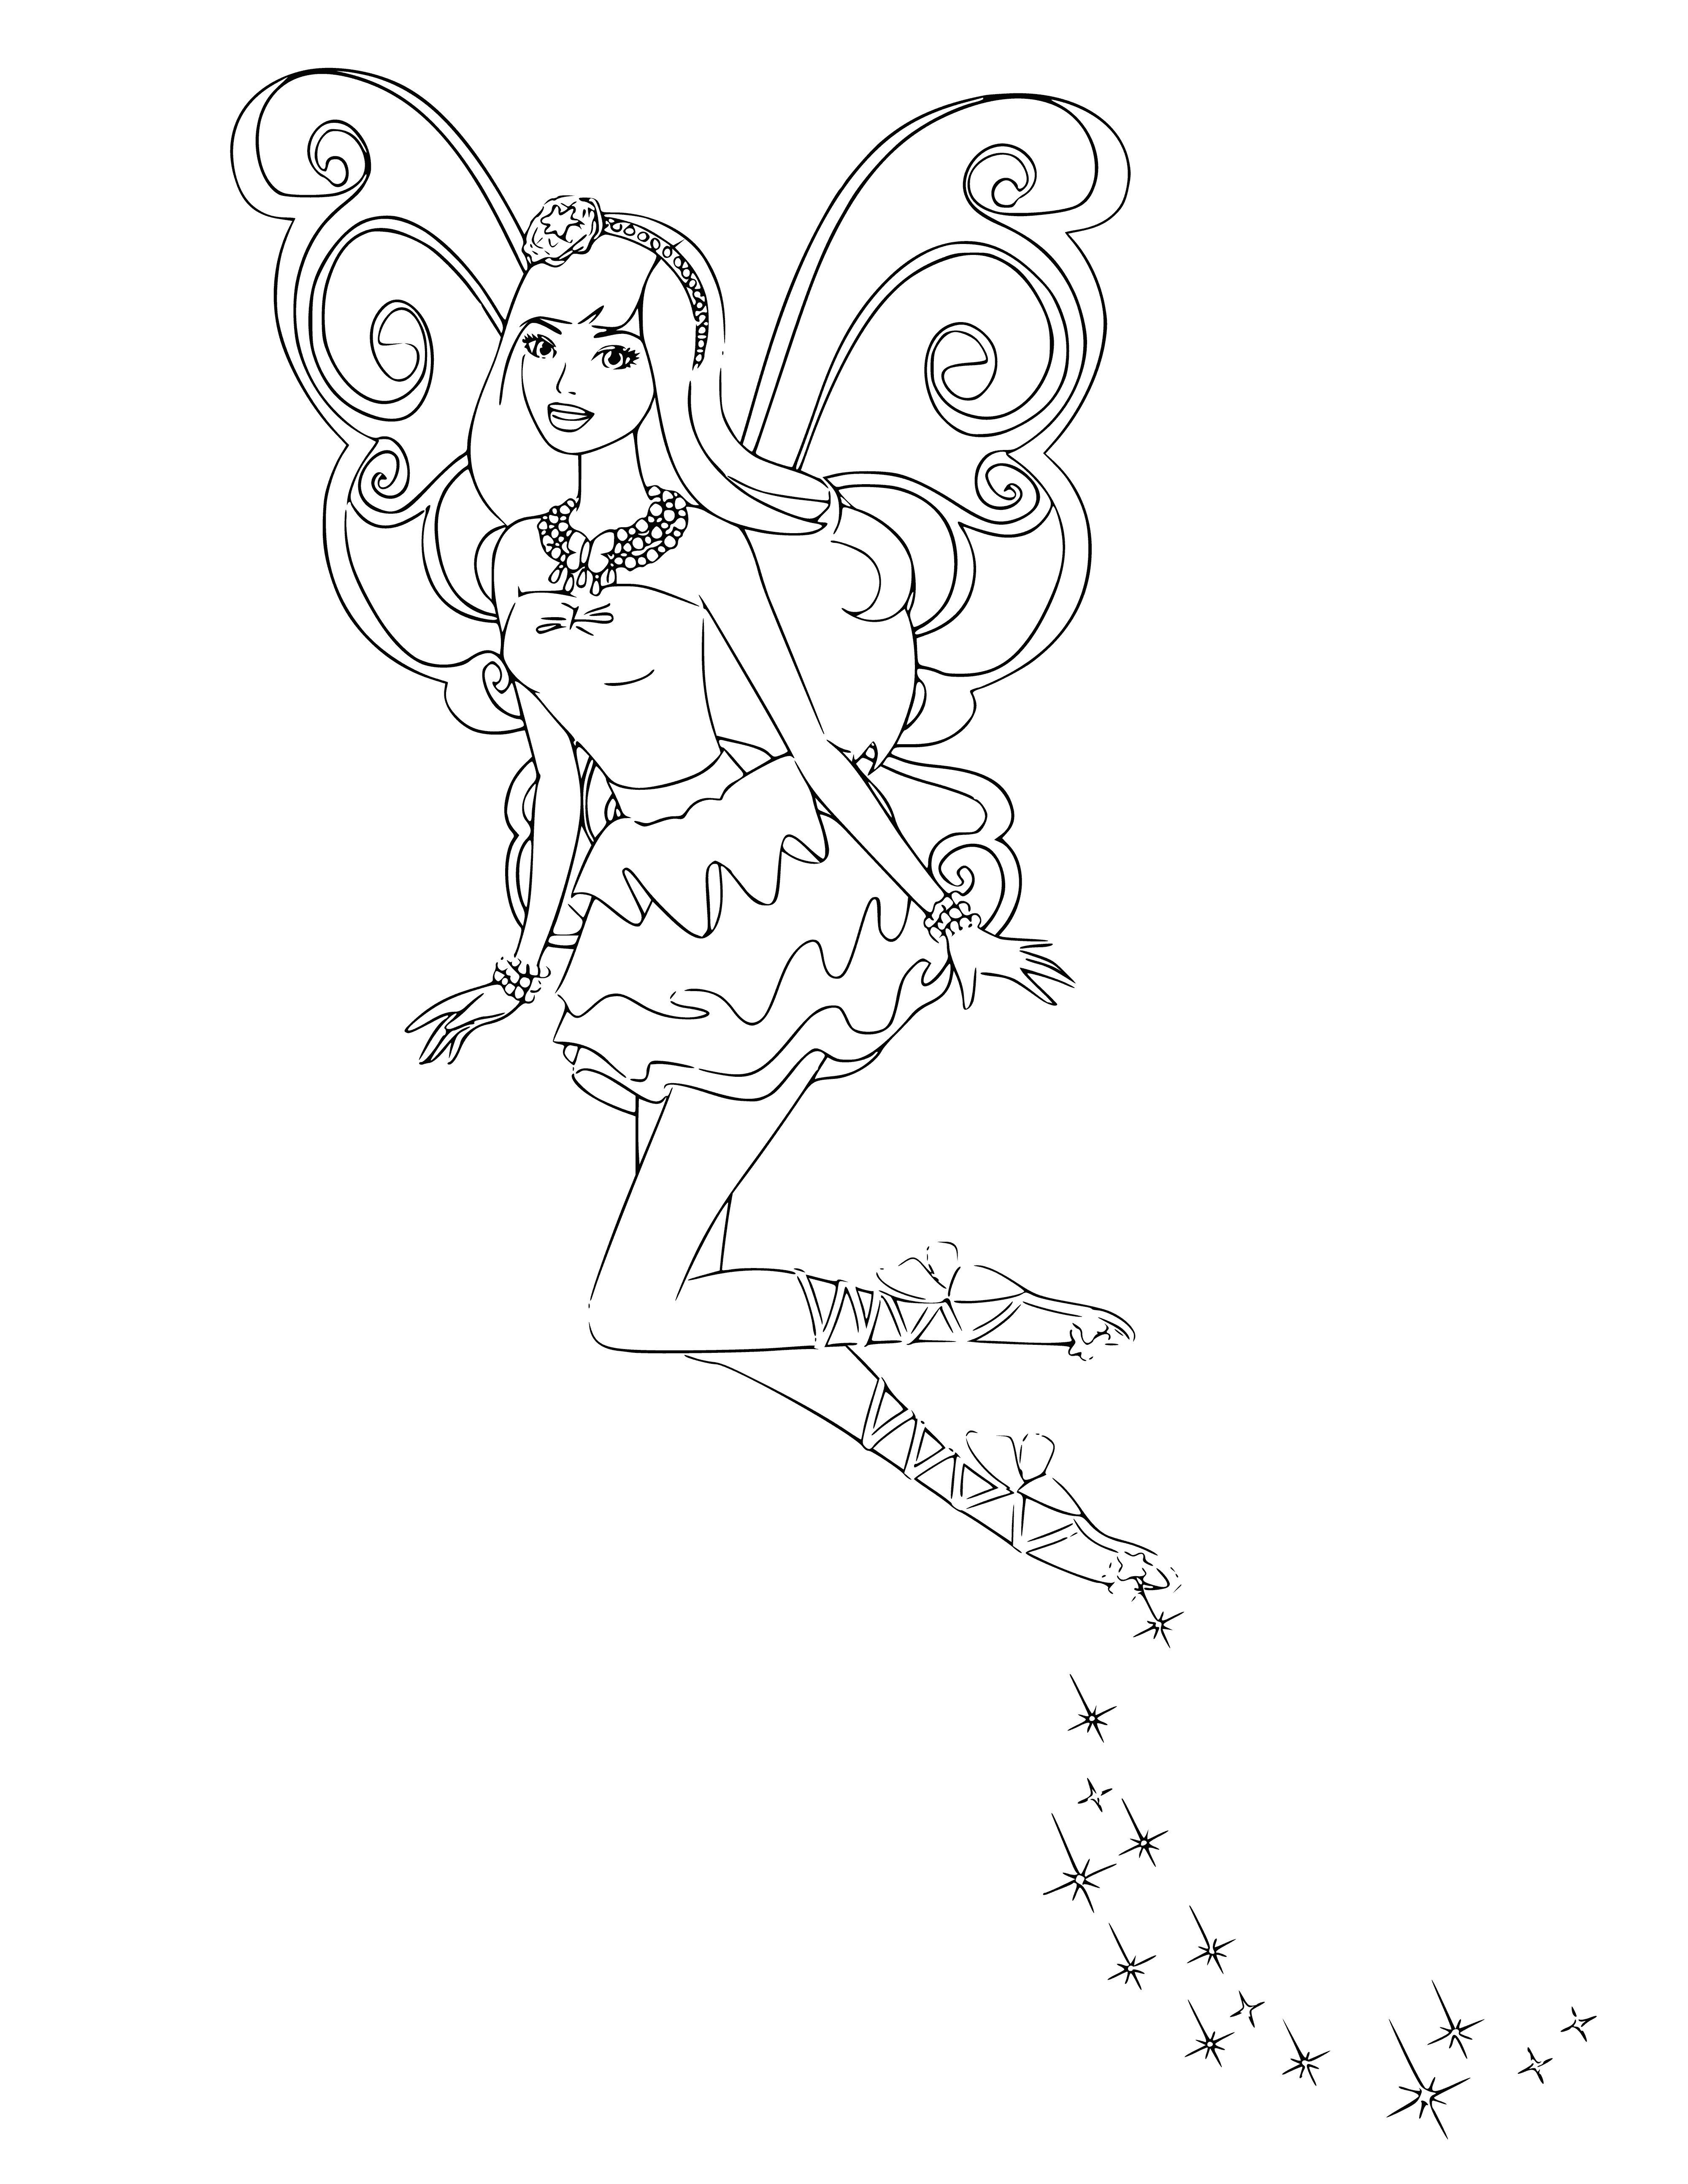 coloring page: Barbie's ready to cast a spell in her glittery pink & purple dress, wings & wand! #magic